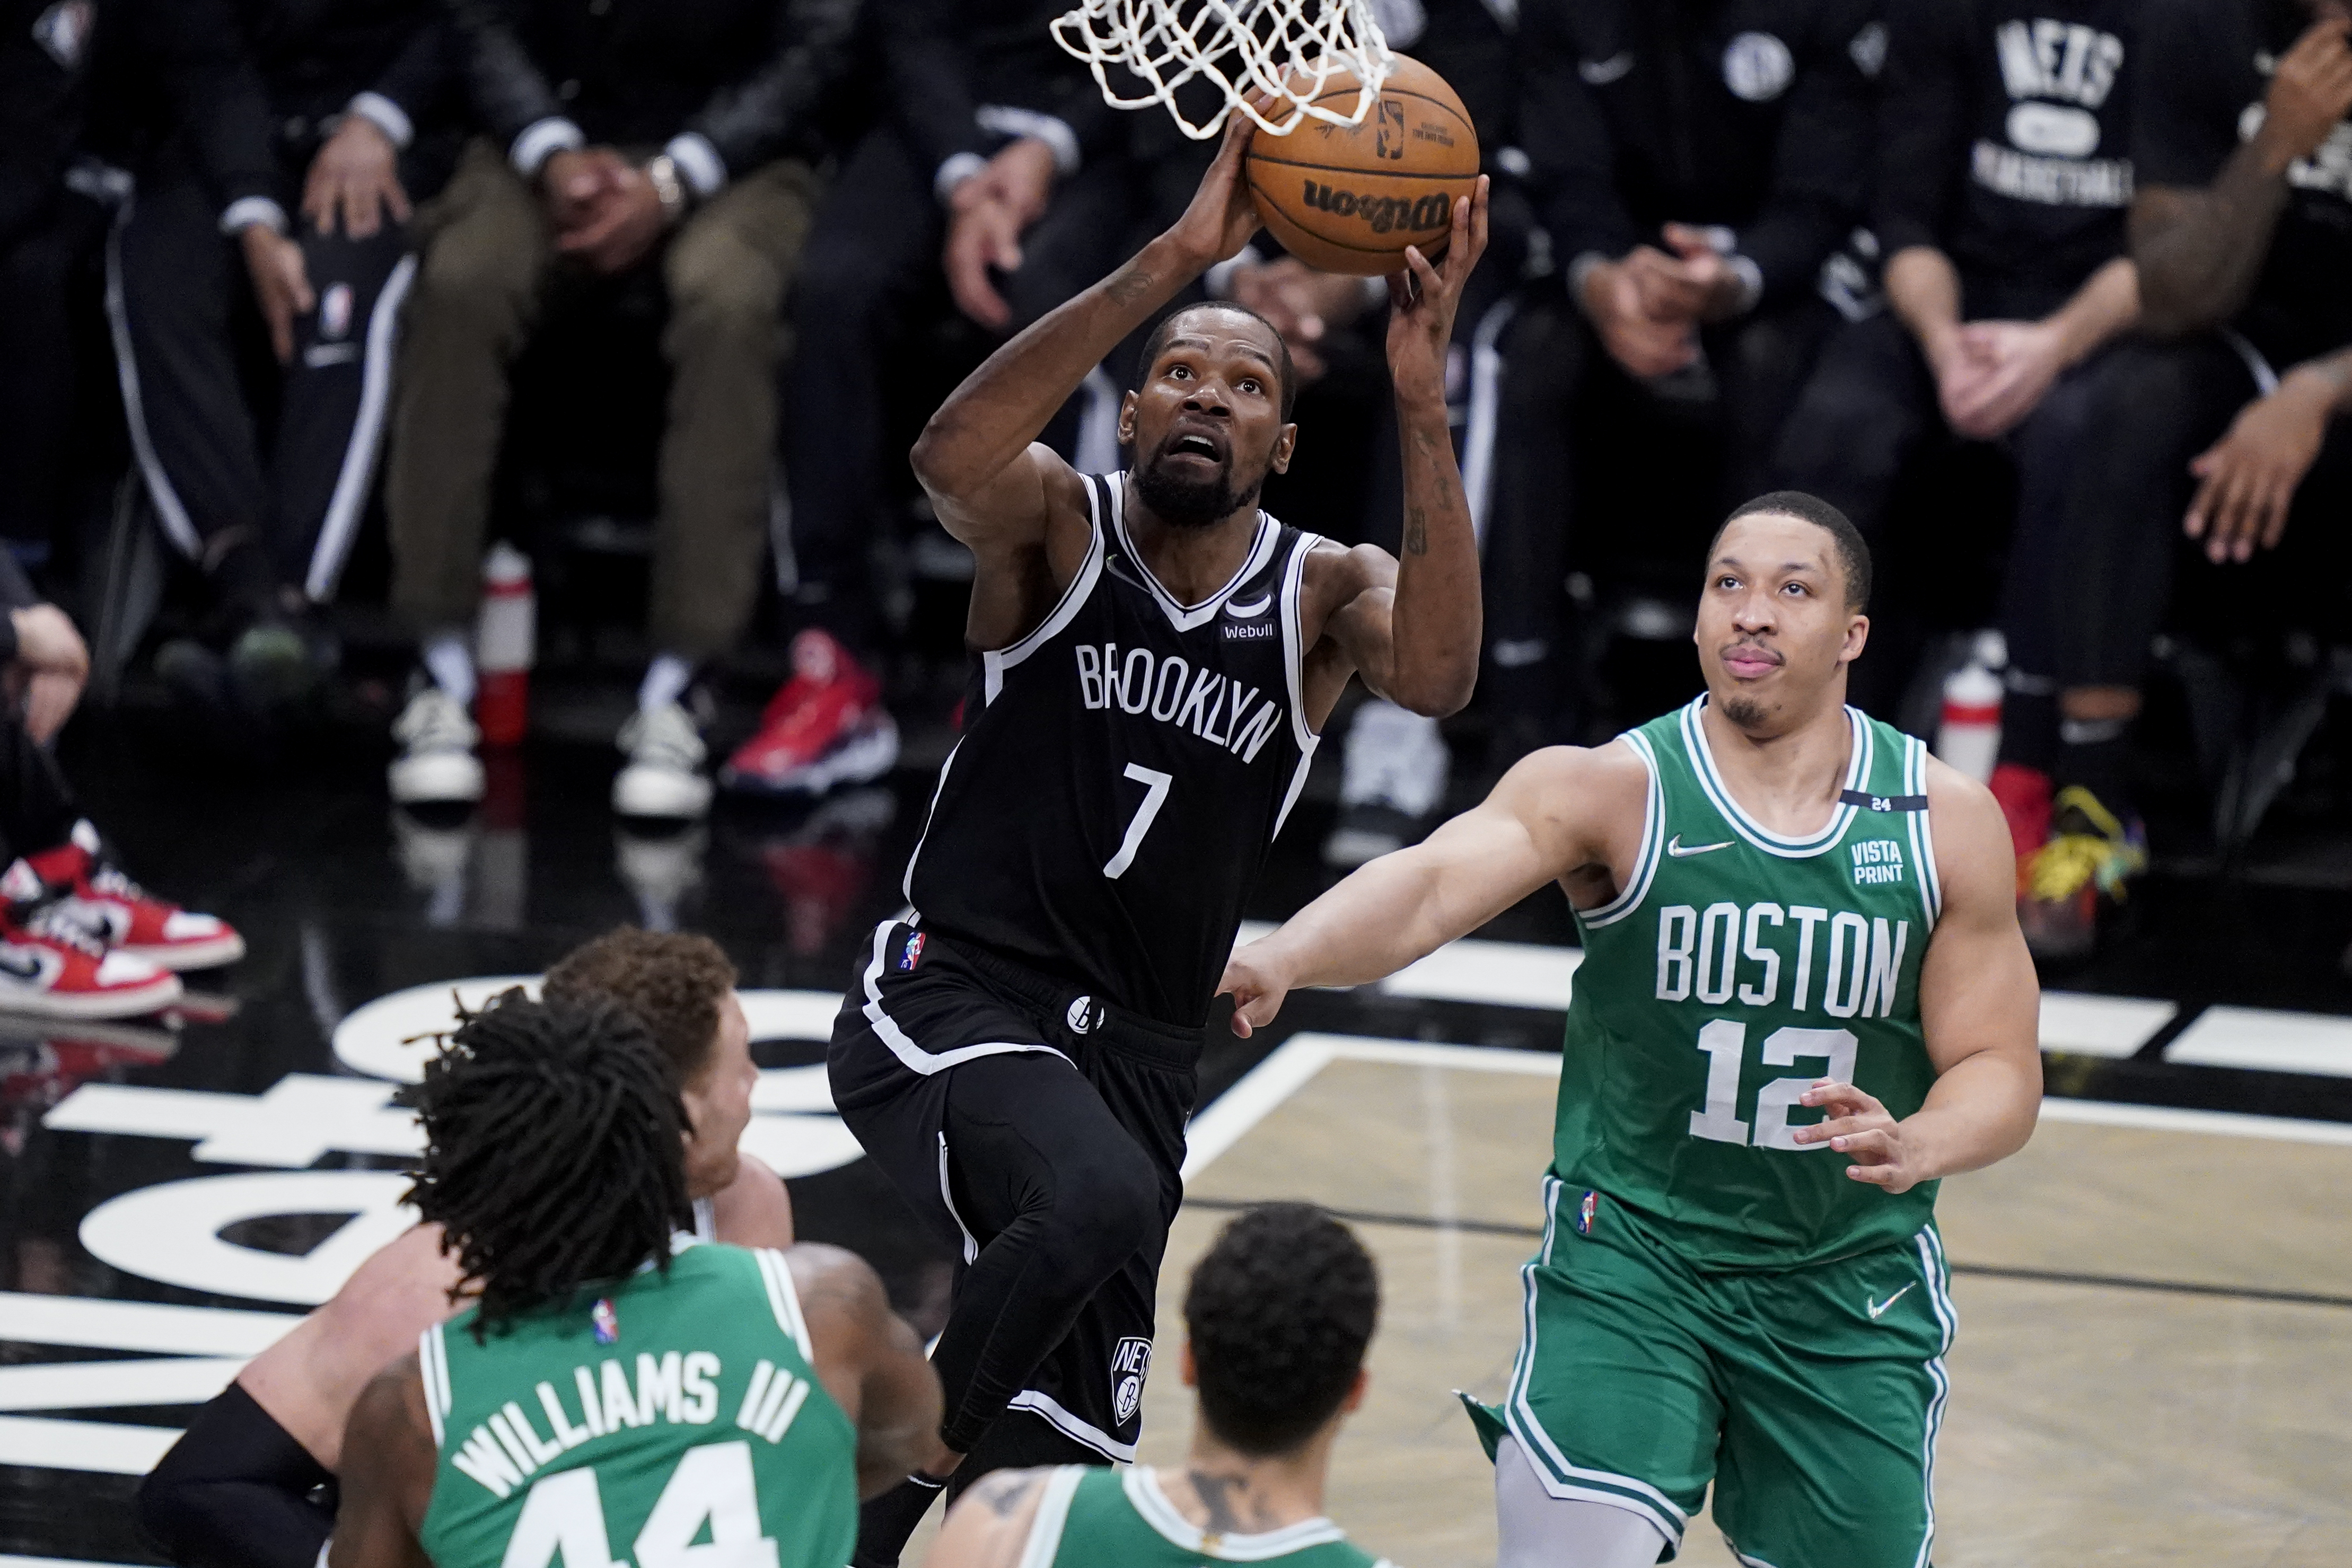 Nets vs. Celtics: How to bet Game 3 at Barclays Center